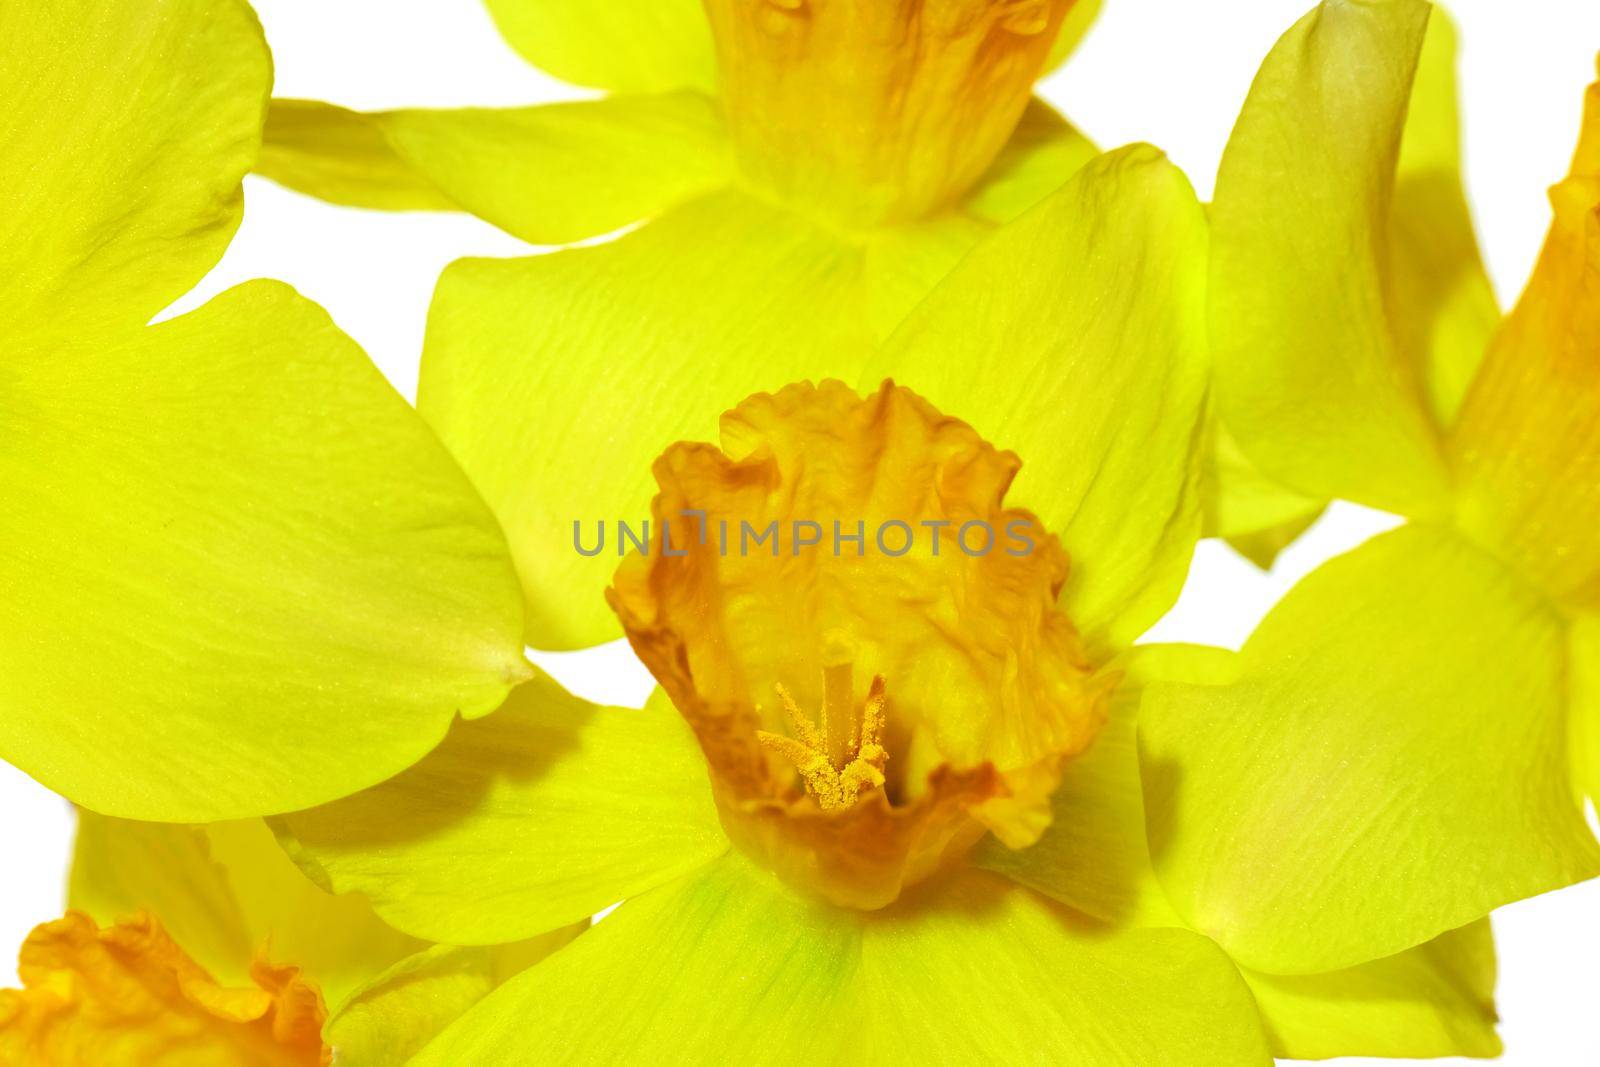 yellow daffodil on a plain background isolate by roman112007